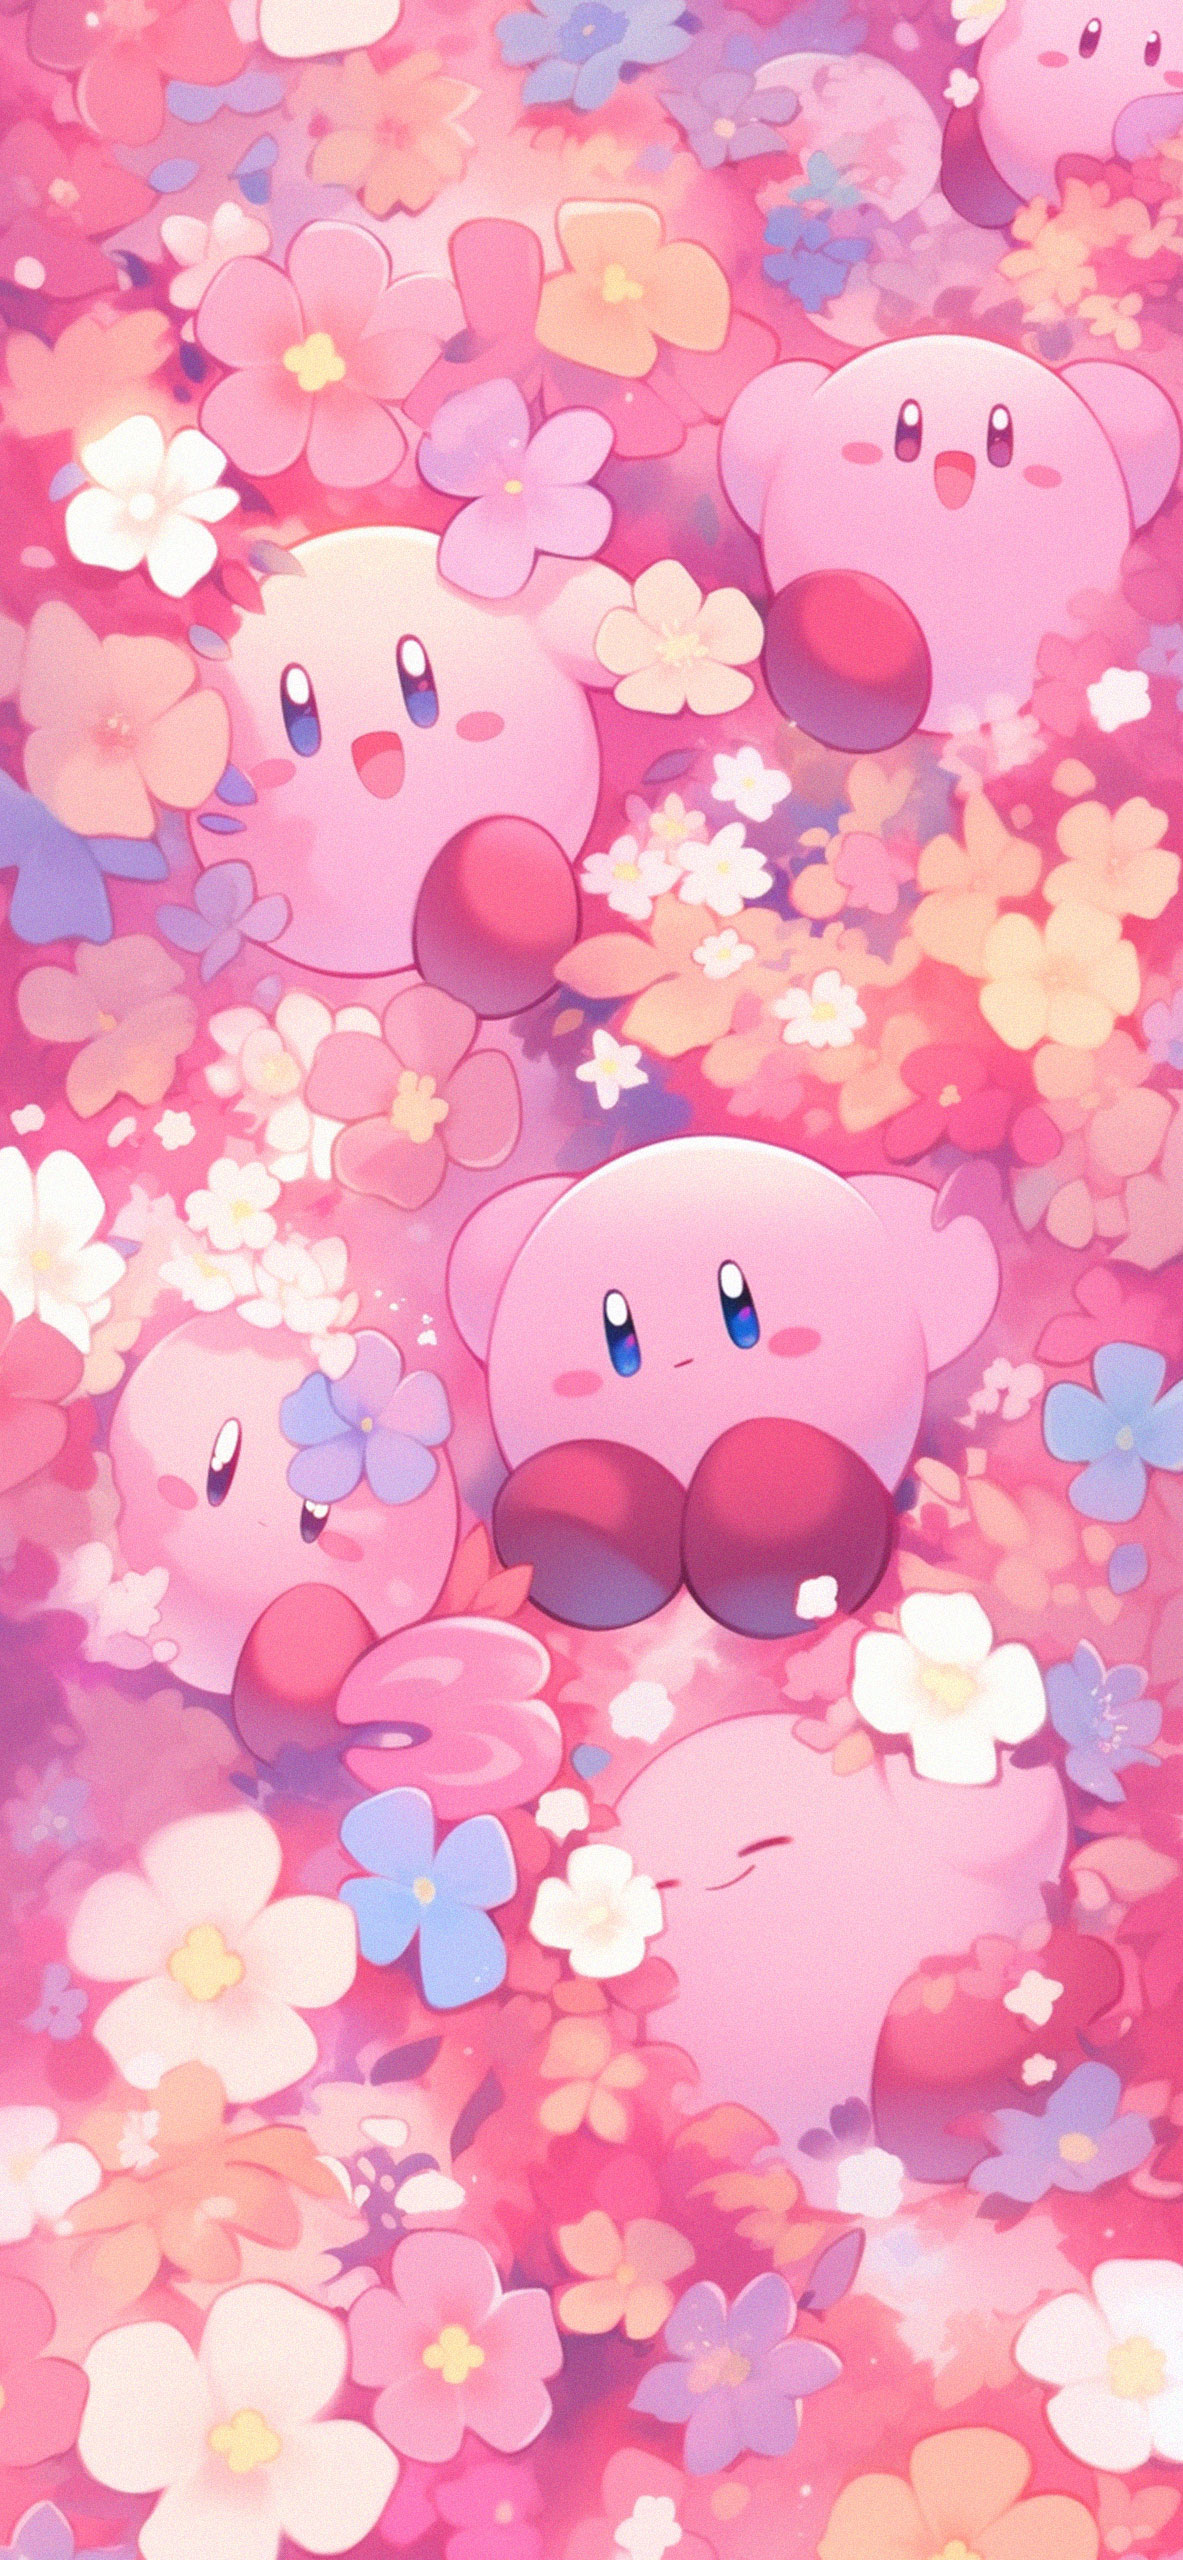 Kirby playing among the flowers art wallpaper Cute kirby aesth